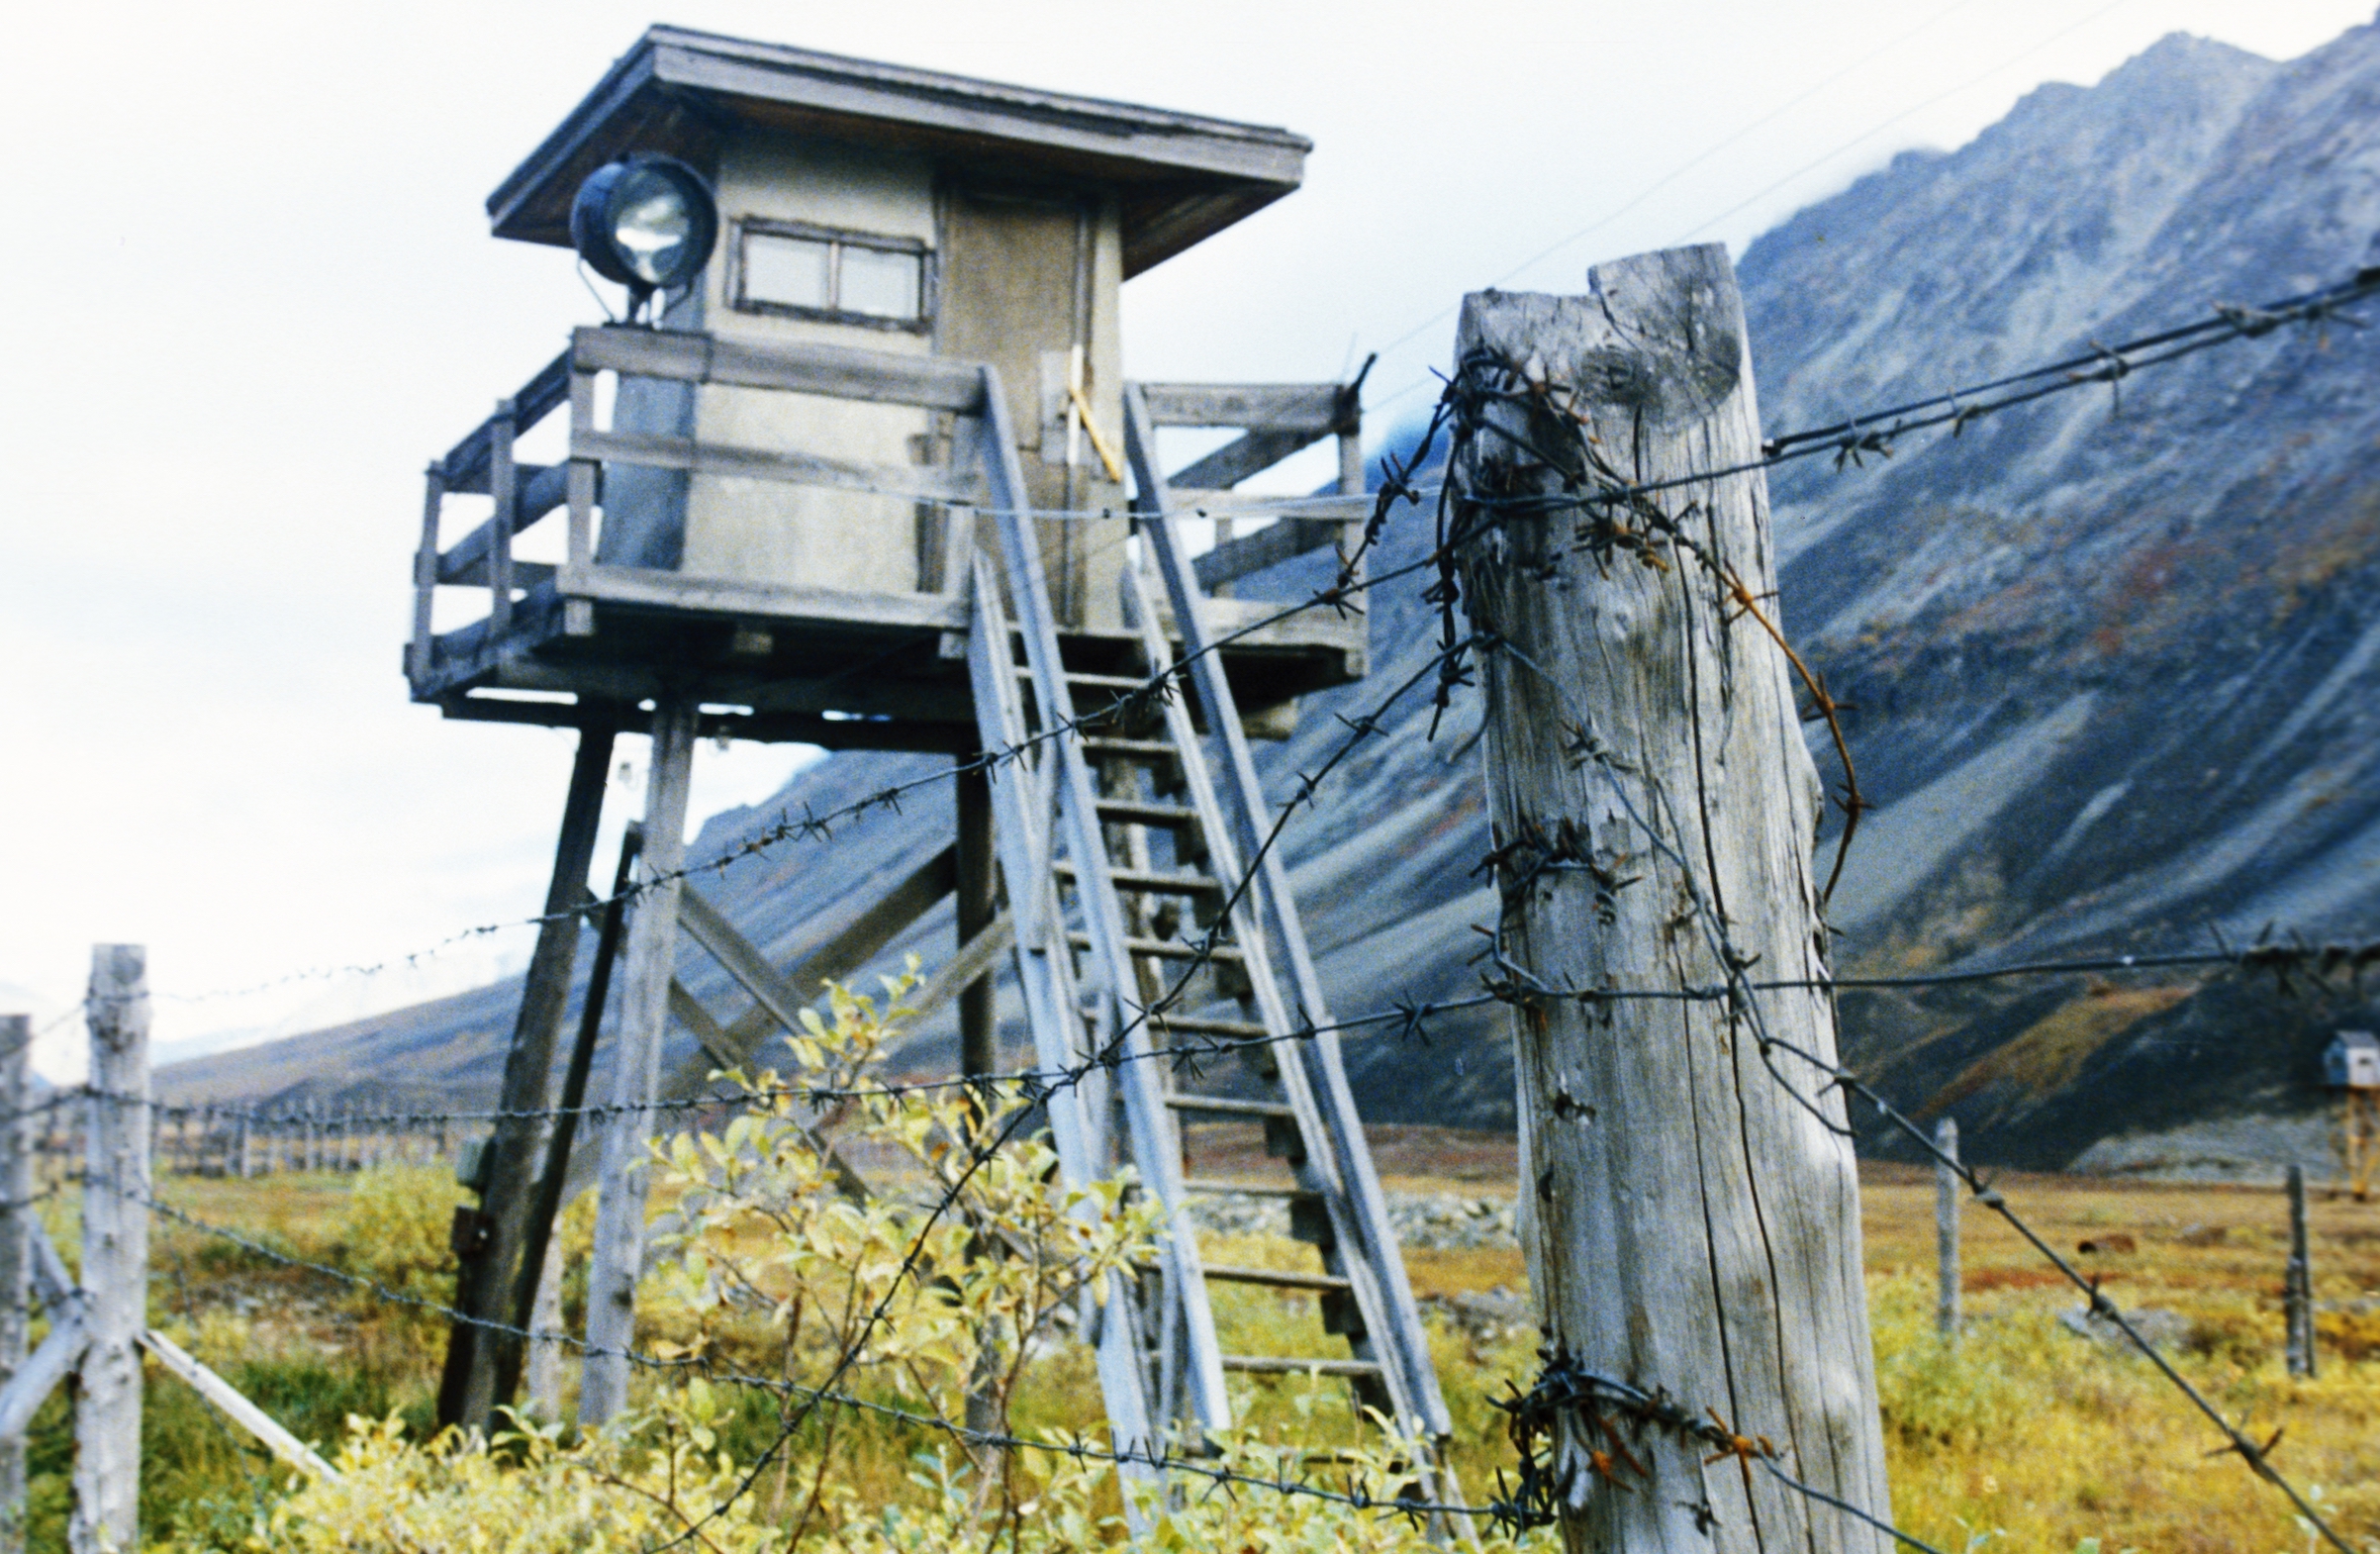 The remains of a Stalin-era gulag in Chukotka, far eastern Russia. (Universal Images Group via Getty)